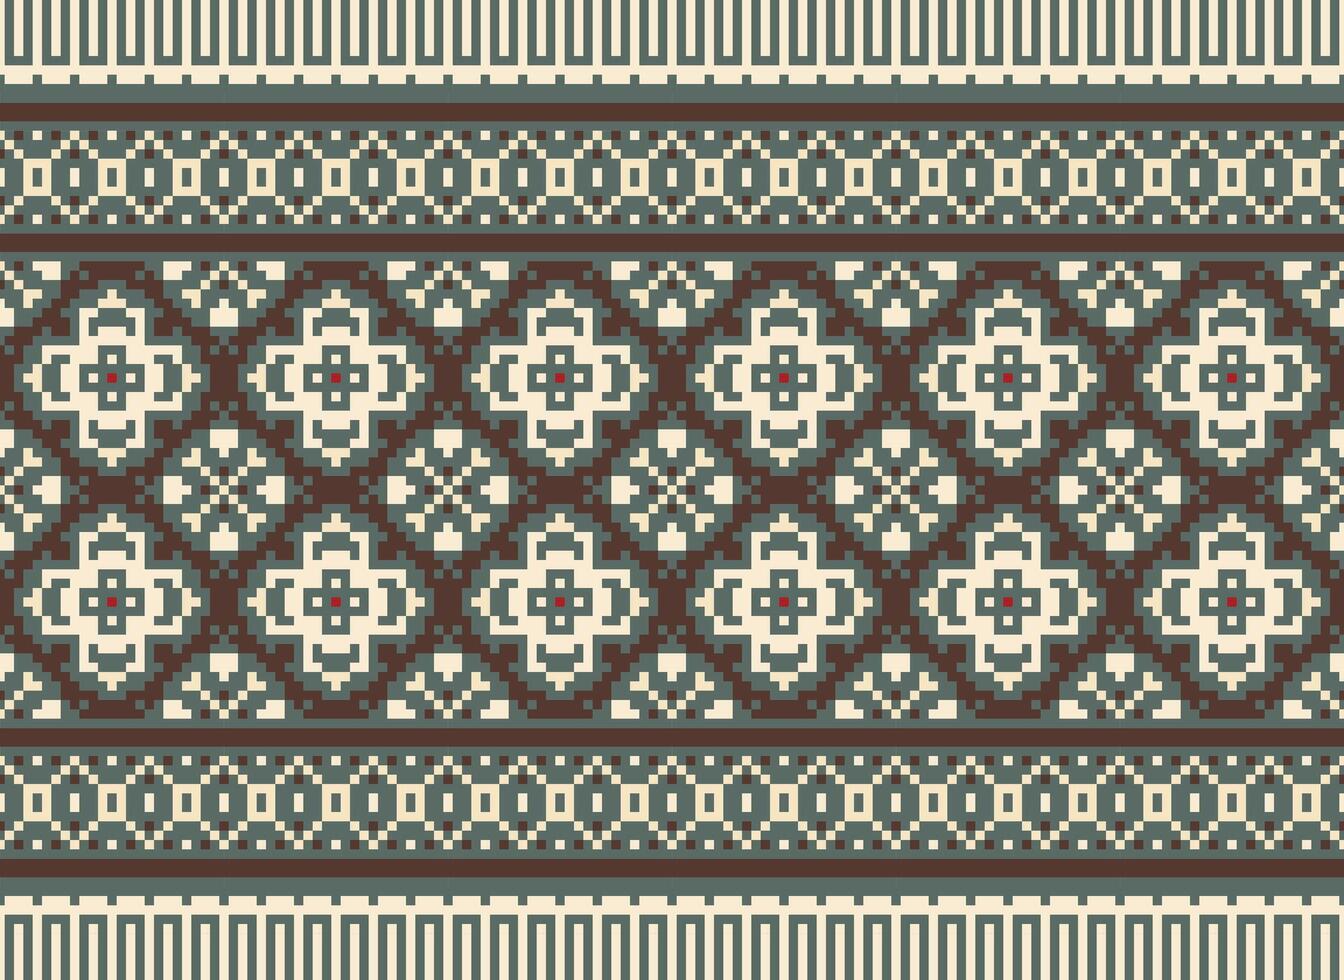 Cross Stitch. Pixel. Geometric ethnic oriental seamless pattern traditional background. Aztec-style abstract vector illustration. Design for textile, curtain, carpet, wallpaper, clothing, wrapping